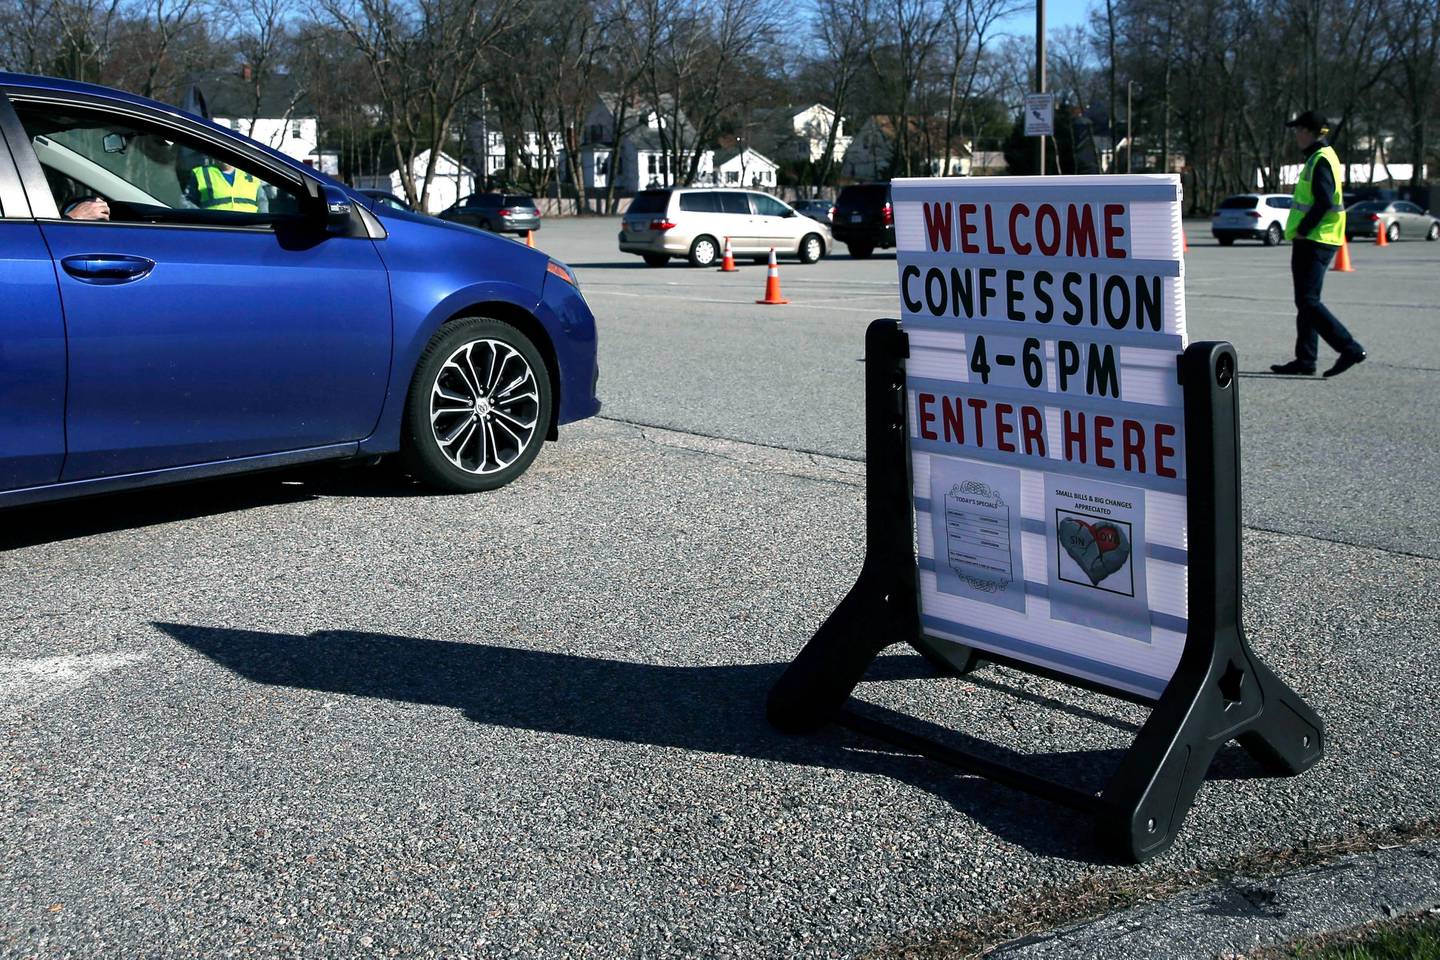 In this Monday, April 6, 2020 photo, cars line up for confession, held in the parking lot due to the virus outbreak, at St. John the Evangelist Catholic Church in Chelmsford, Mass. After Massachusetts Gov. Charlie Baker issued an emergency order prohibiting most gatherings of over 10 people due to the coronavirus, the parish moved their confessional outdoors with drive-up service. (AP Photo/Charles Krupa)